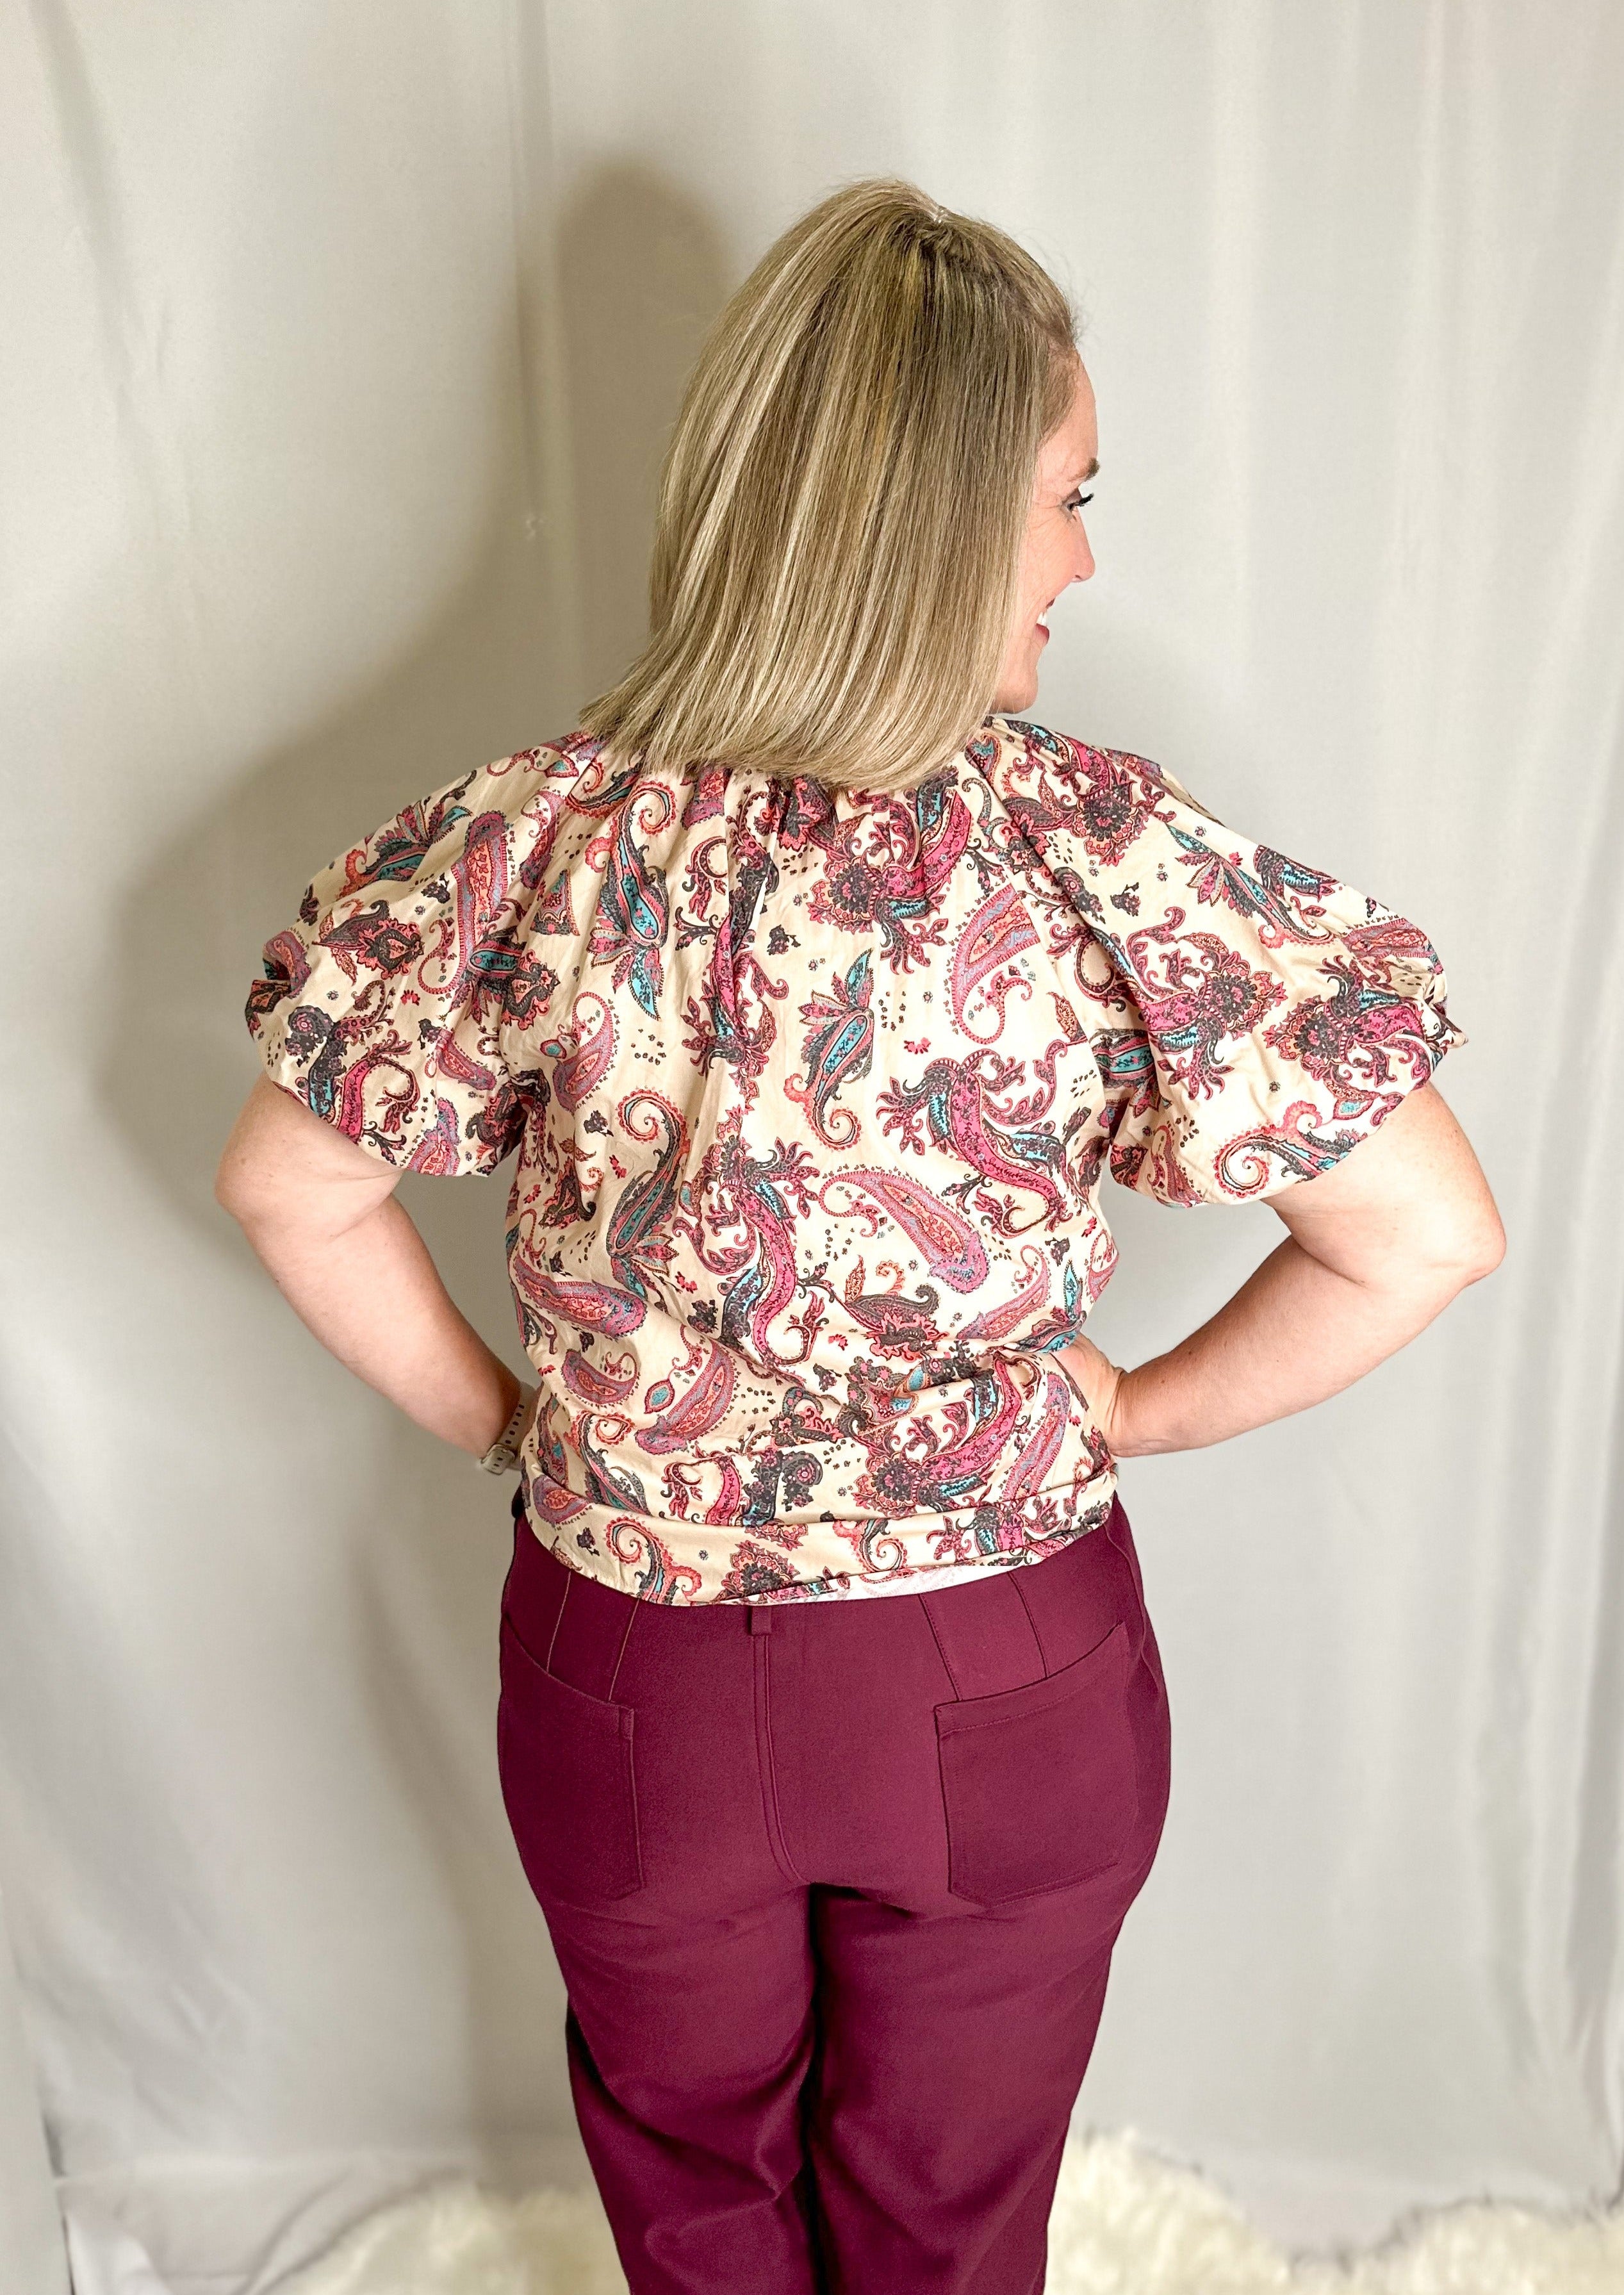 Back of the wine cropped pants showing two pockets.